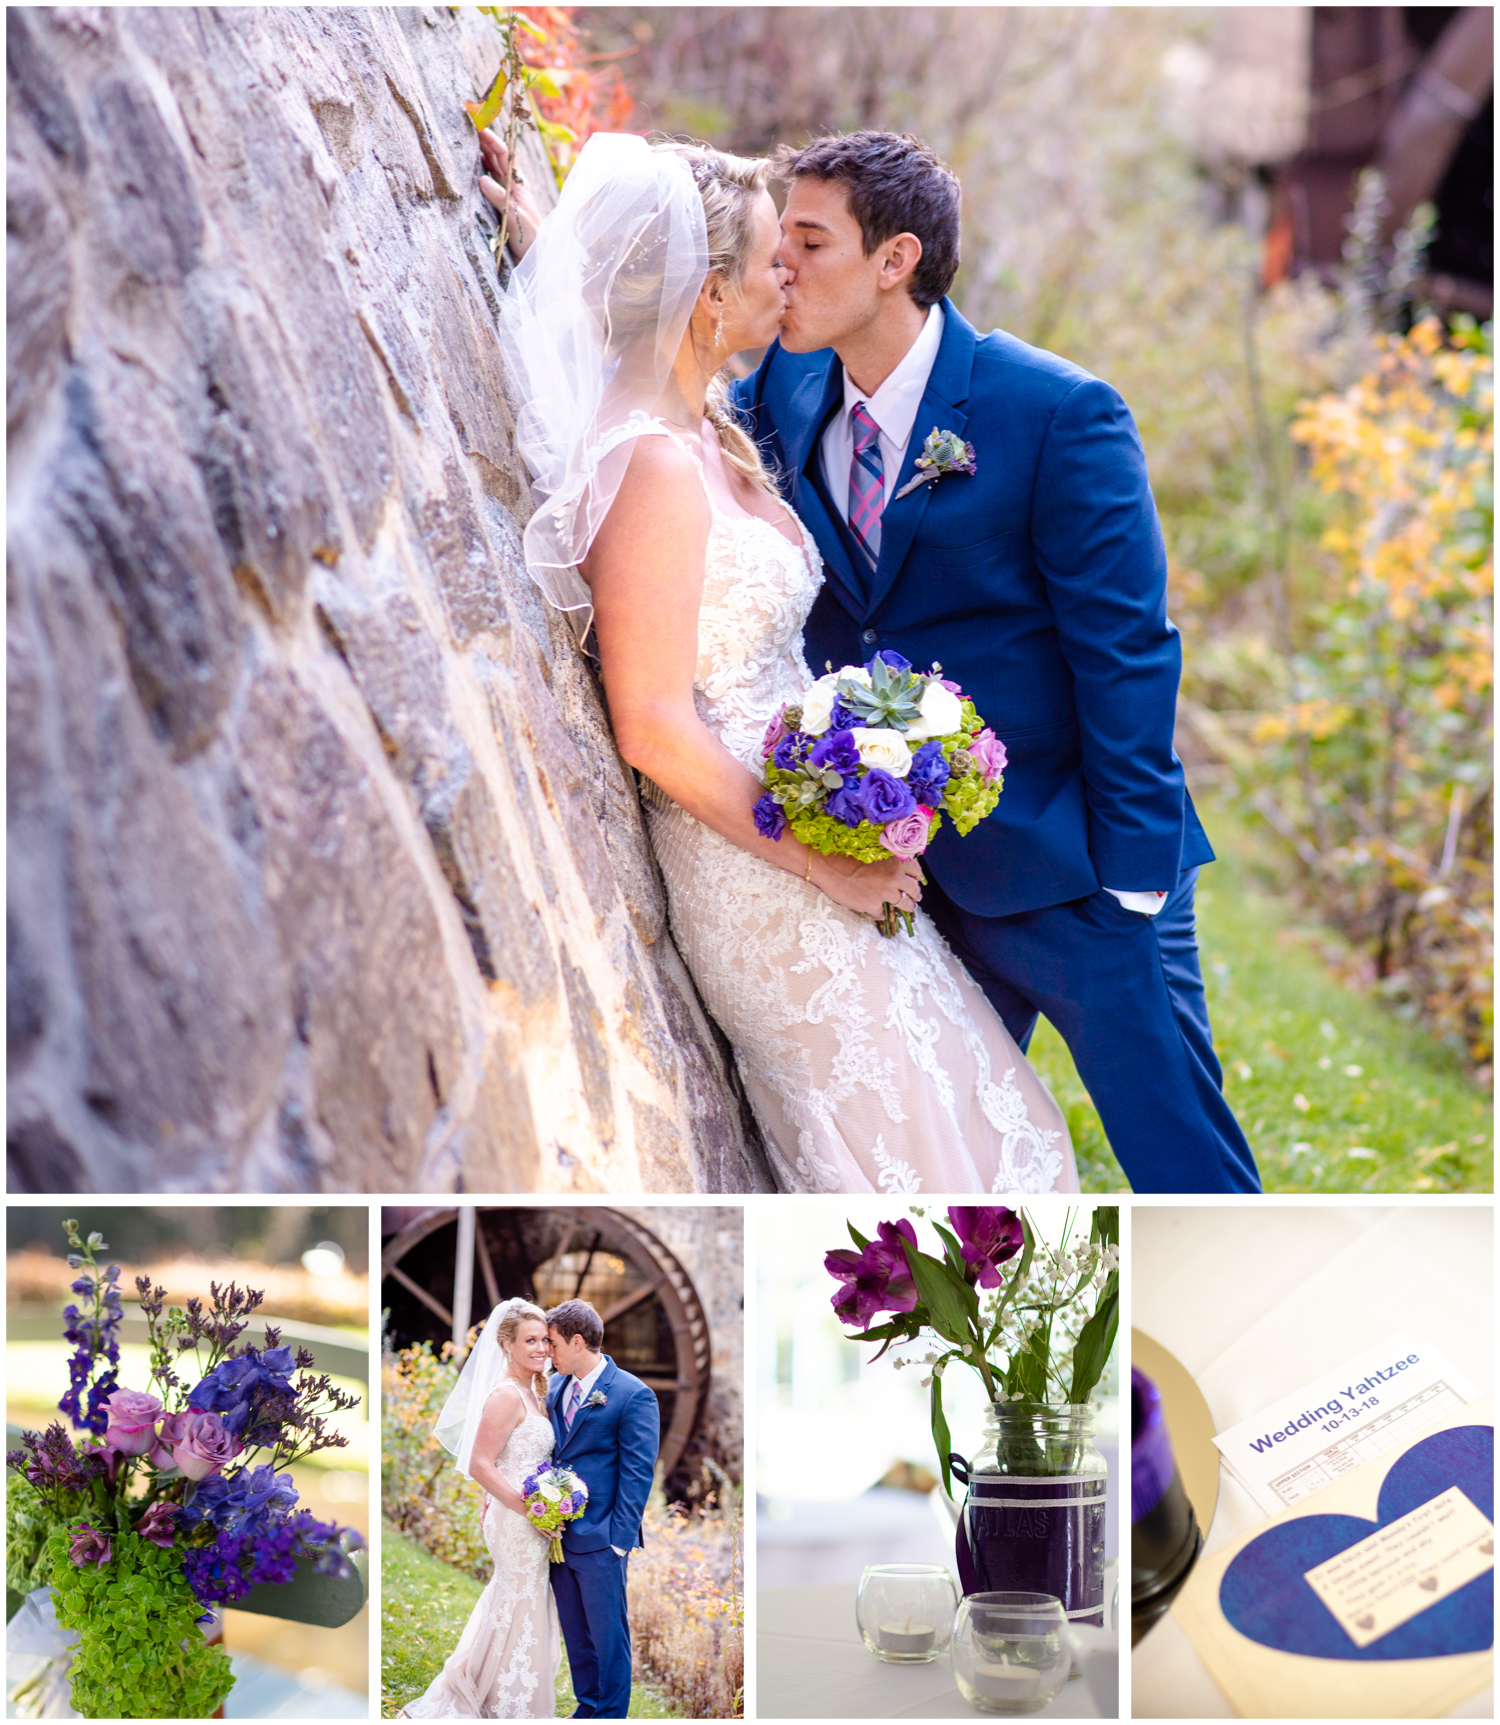 Mandy + Nick Wedding at Dunafon Castle | Britni Girard Photography - Colorado Wedding and Lifestyle Photography - Flowers by Stems A Flower Shop, Dress by Maggie Sottero